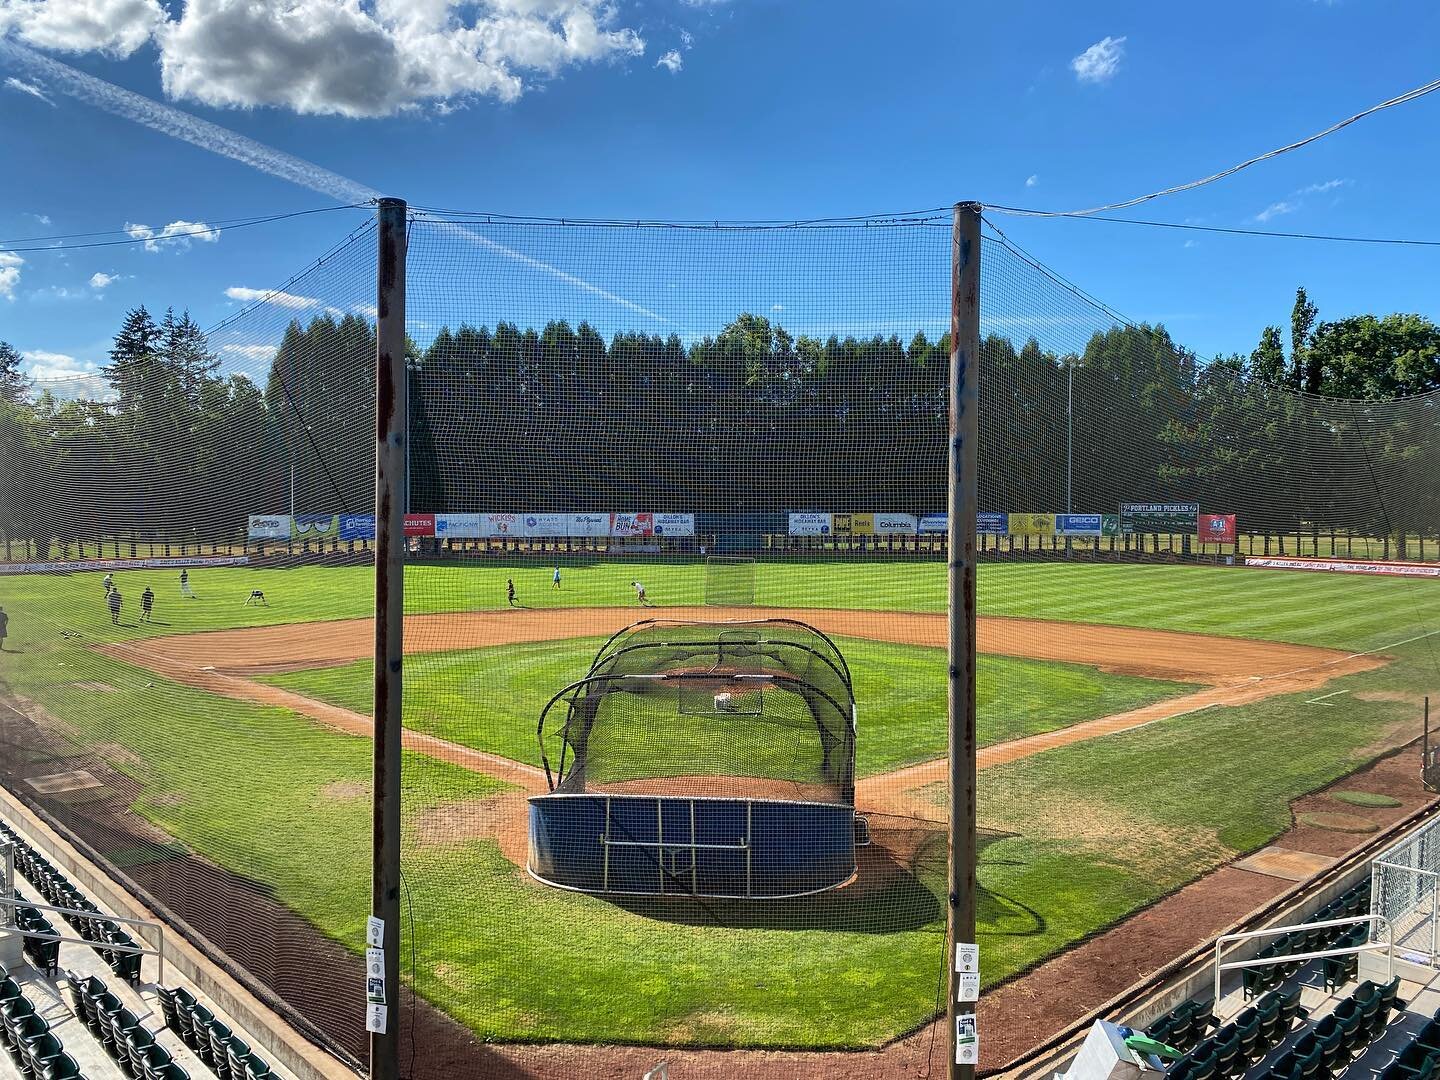 It&rsquo;s a beautiful day for baseball! At 7pm the Rosebuds take on @gherkinsbaseball at Walker Stadium in SE Portland! #GetWild🤠⚾️

Links for tickets &amp; live stream in bio!